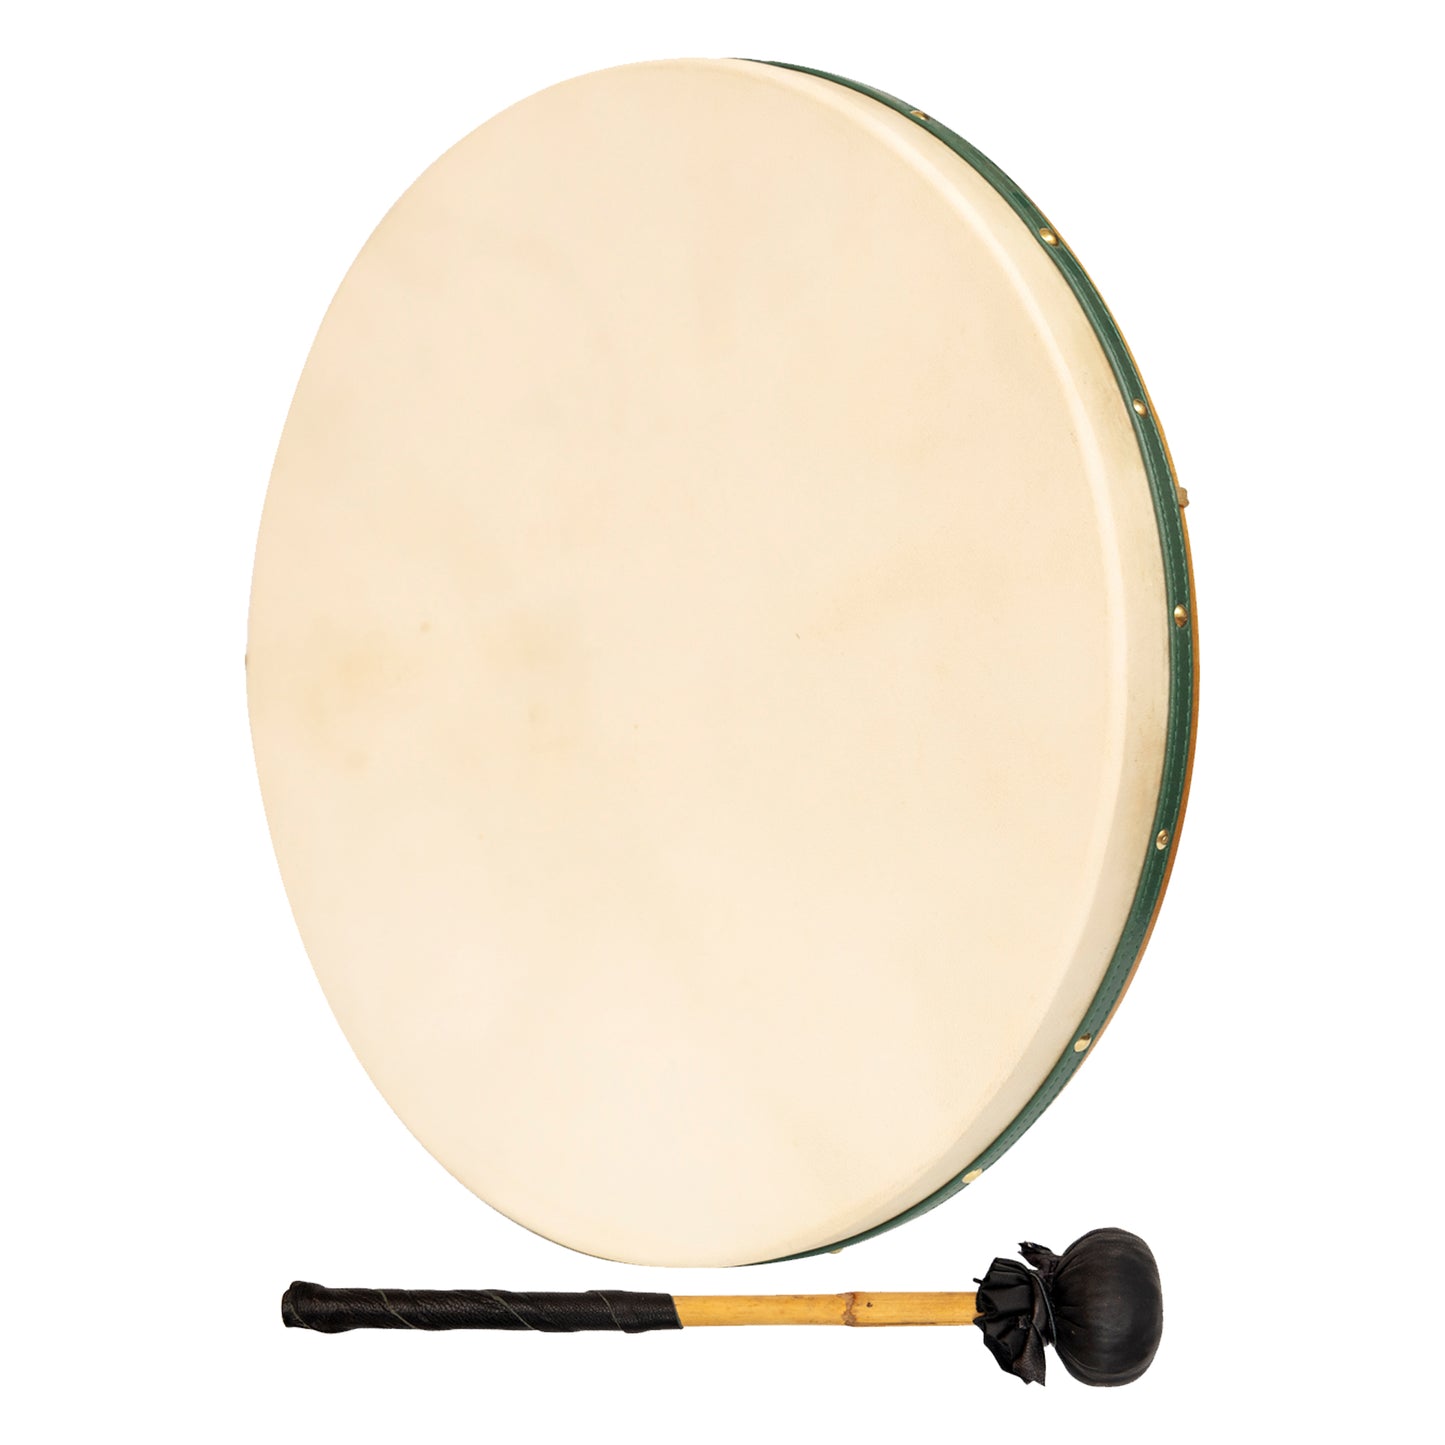 FRAME DRUM 18 INCH NON TUNABLE MULBERRY | SHAMAN DRUM